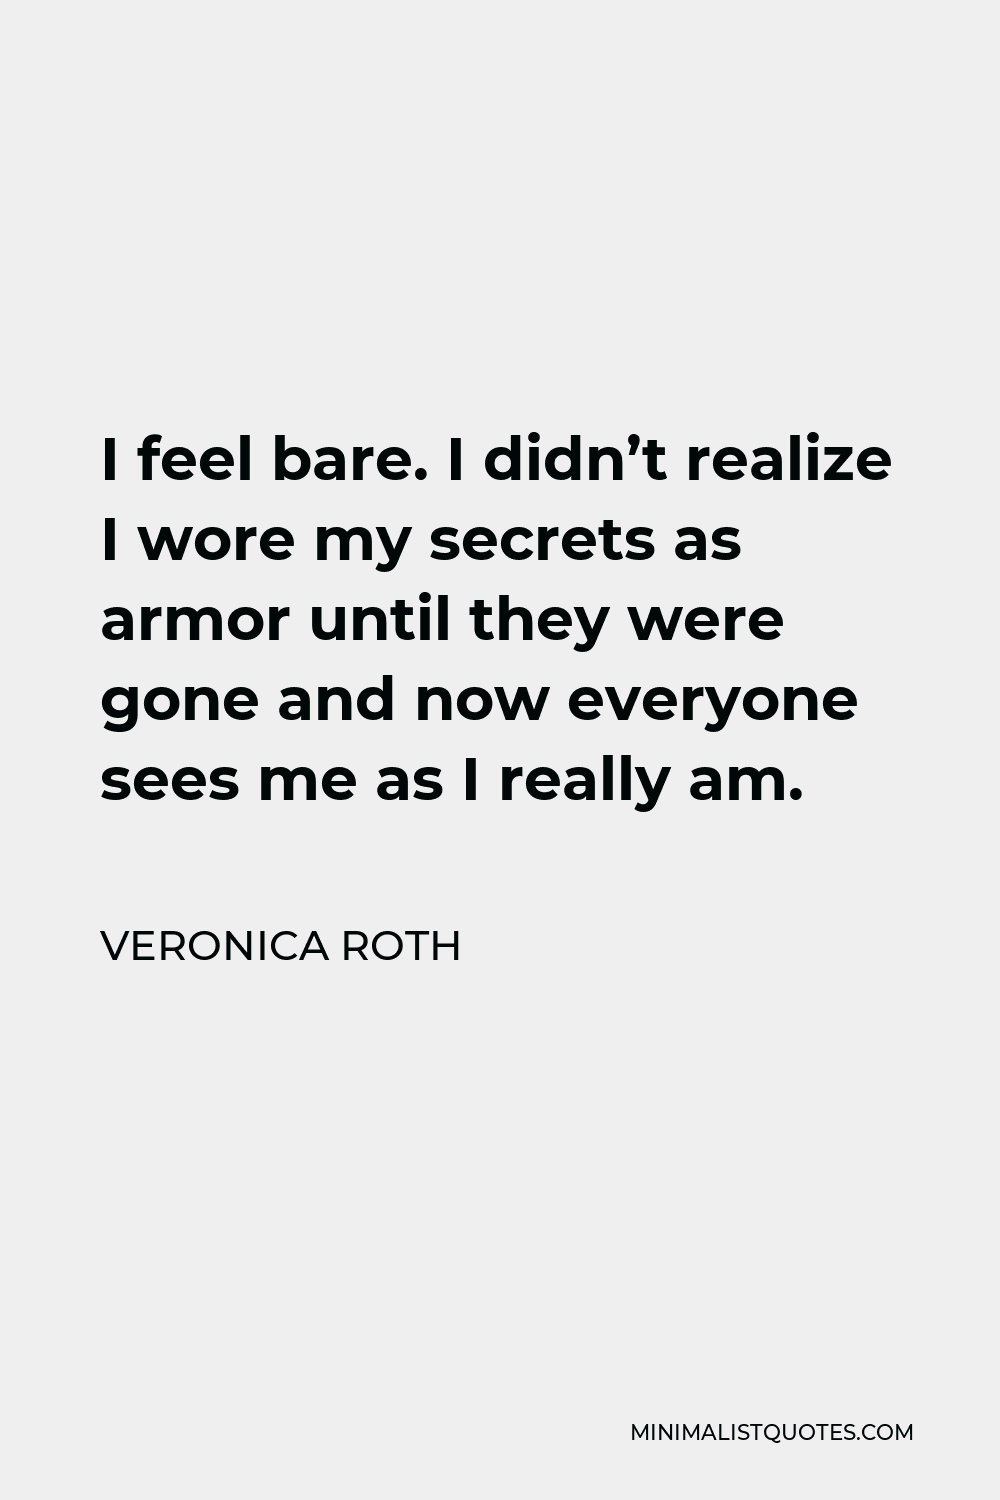 Veronica Roth Quote - I feel bare. I didn’t realize I wore my secrets as armor until they were gone and now everyone sees me as I really am.